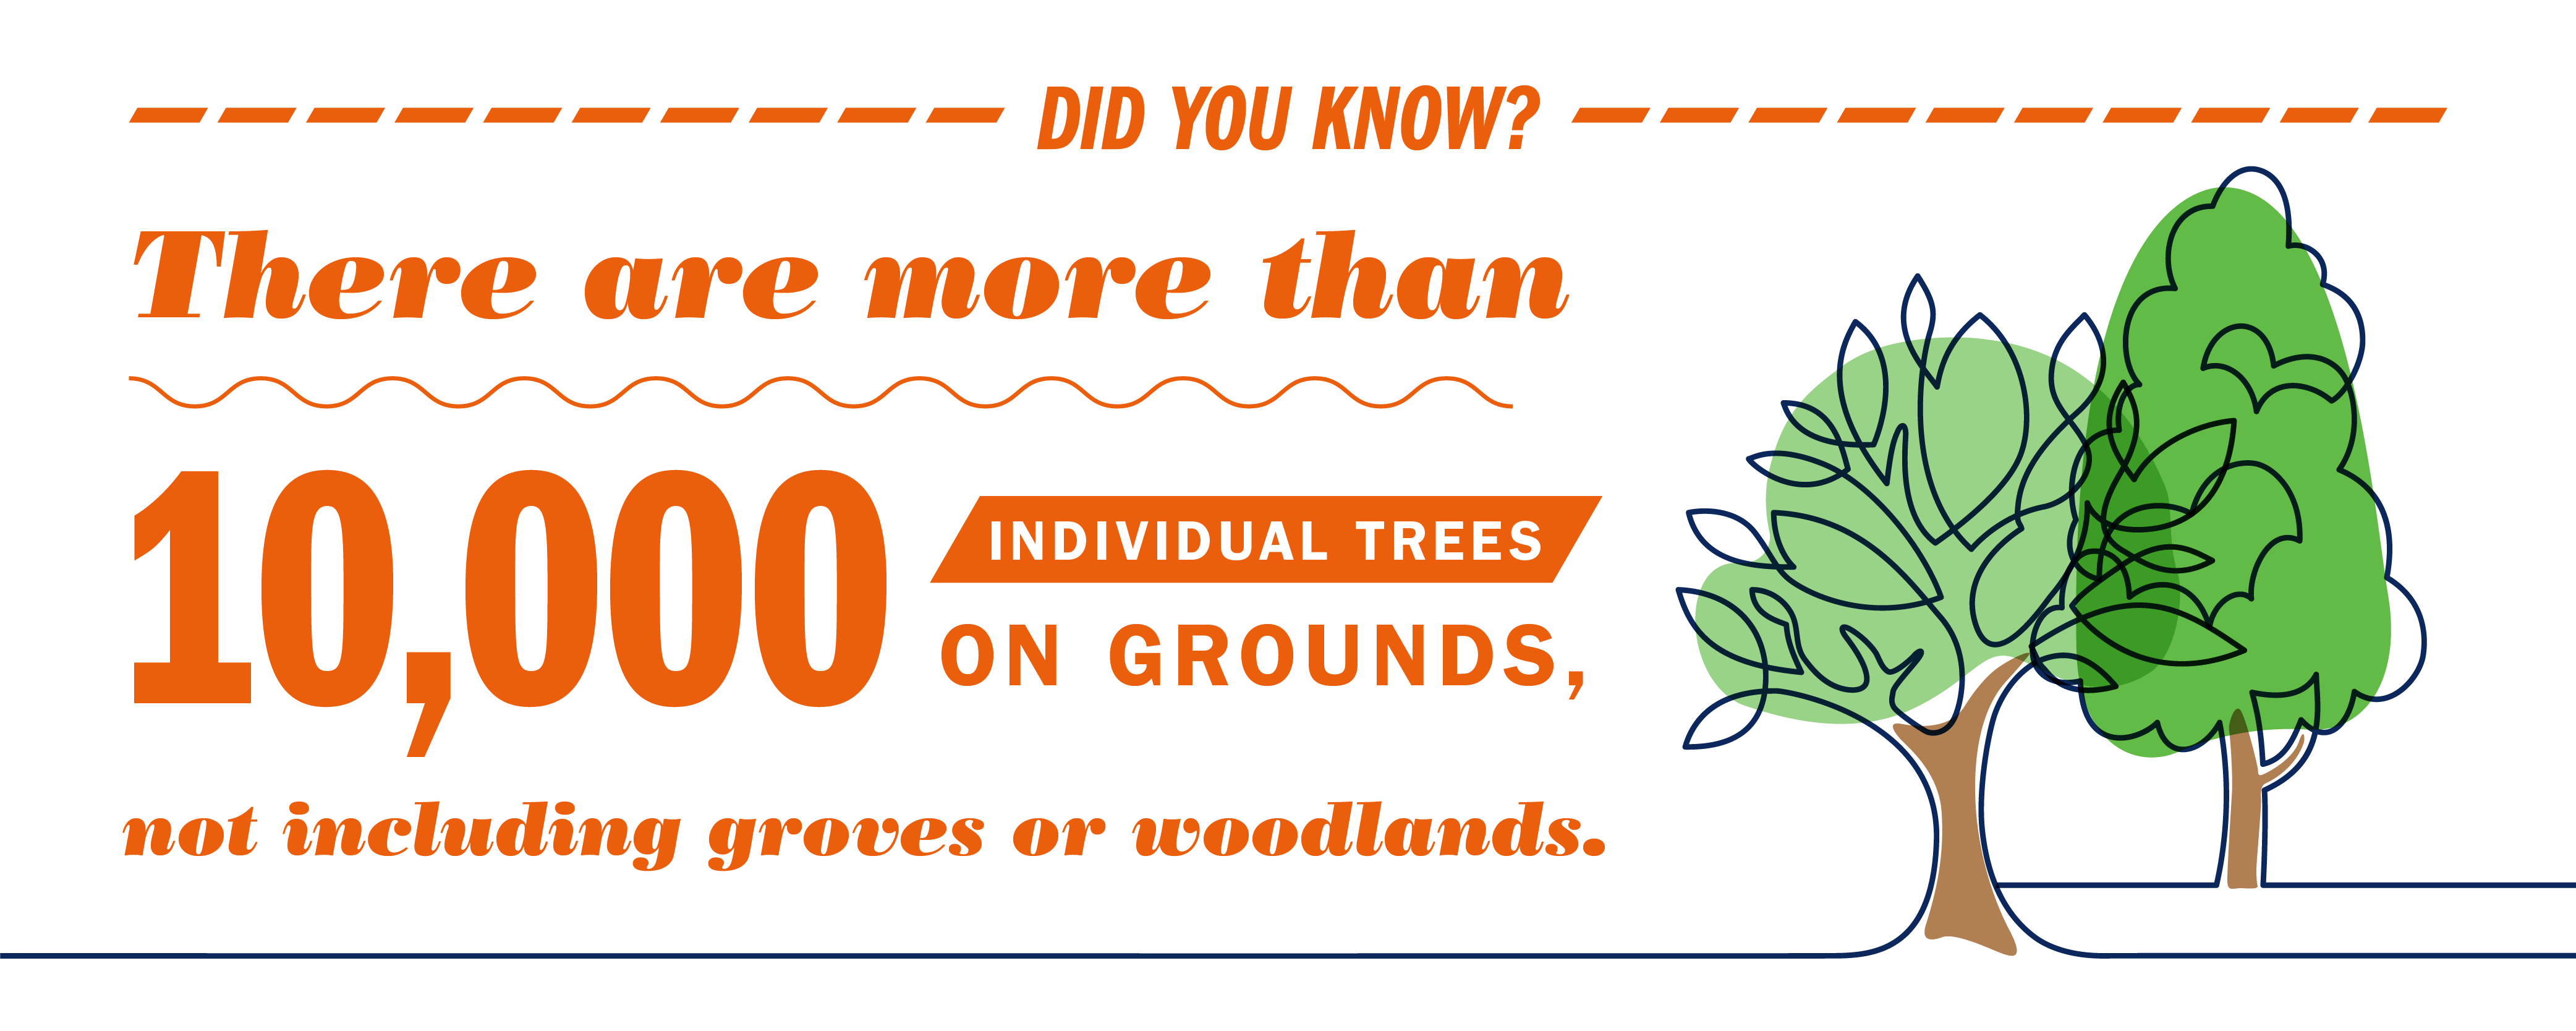 Did you know? There are more than 10,000 individual trees on Grounds, not including groves or woodlands.